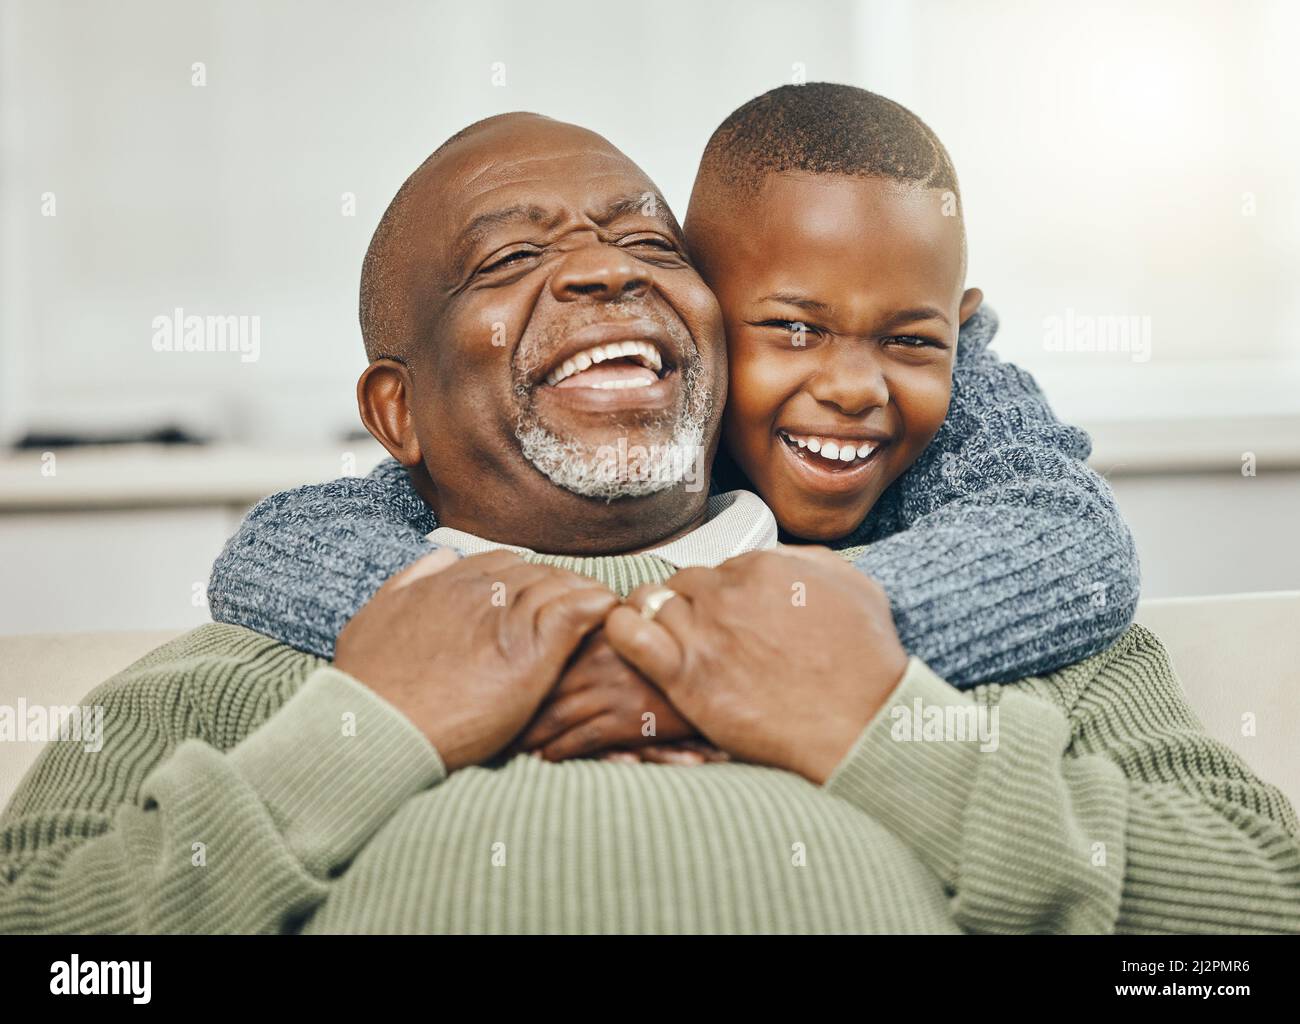 My boy, from my boy. Shot of a grandfather bonding with his young grandson on a sofa at home. Stock Photo